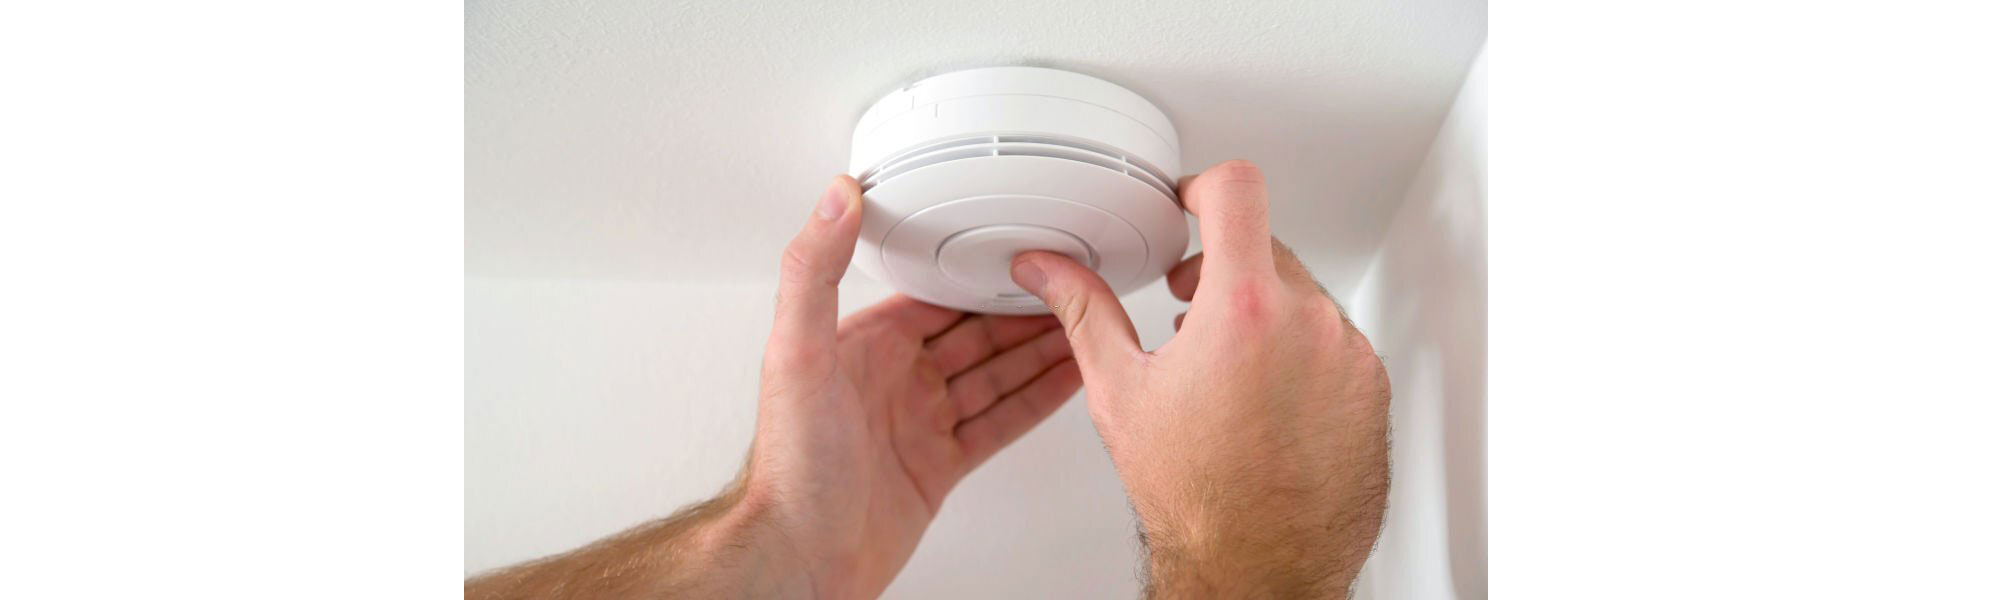 The What, Why, and How-To Guide for Smoke Alarms